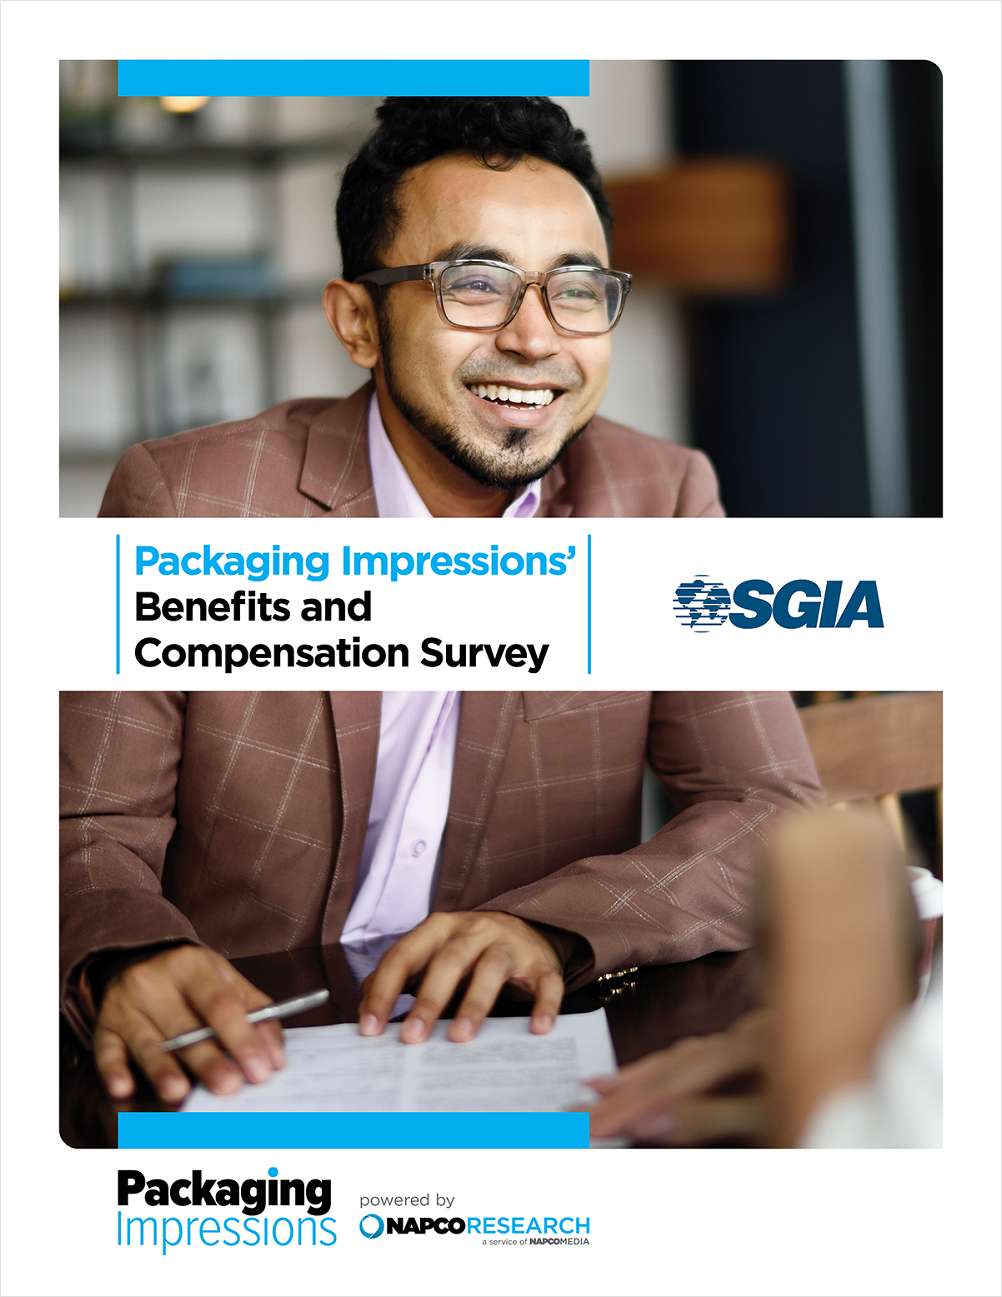 Packaging Impressions' Benefits and Compensation Survey